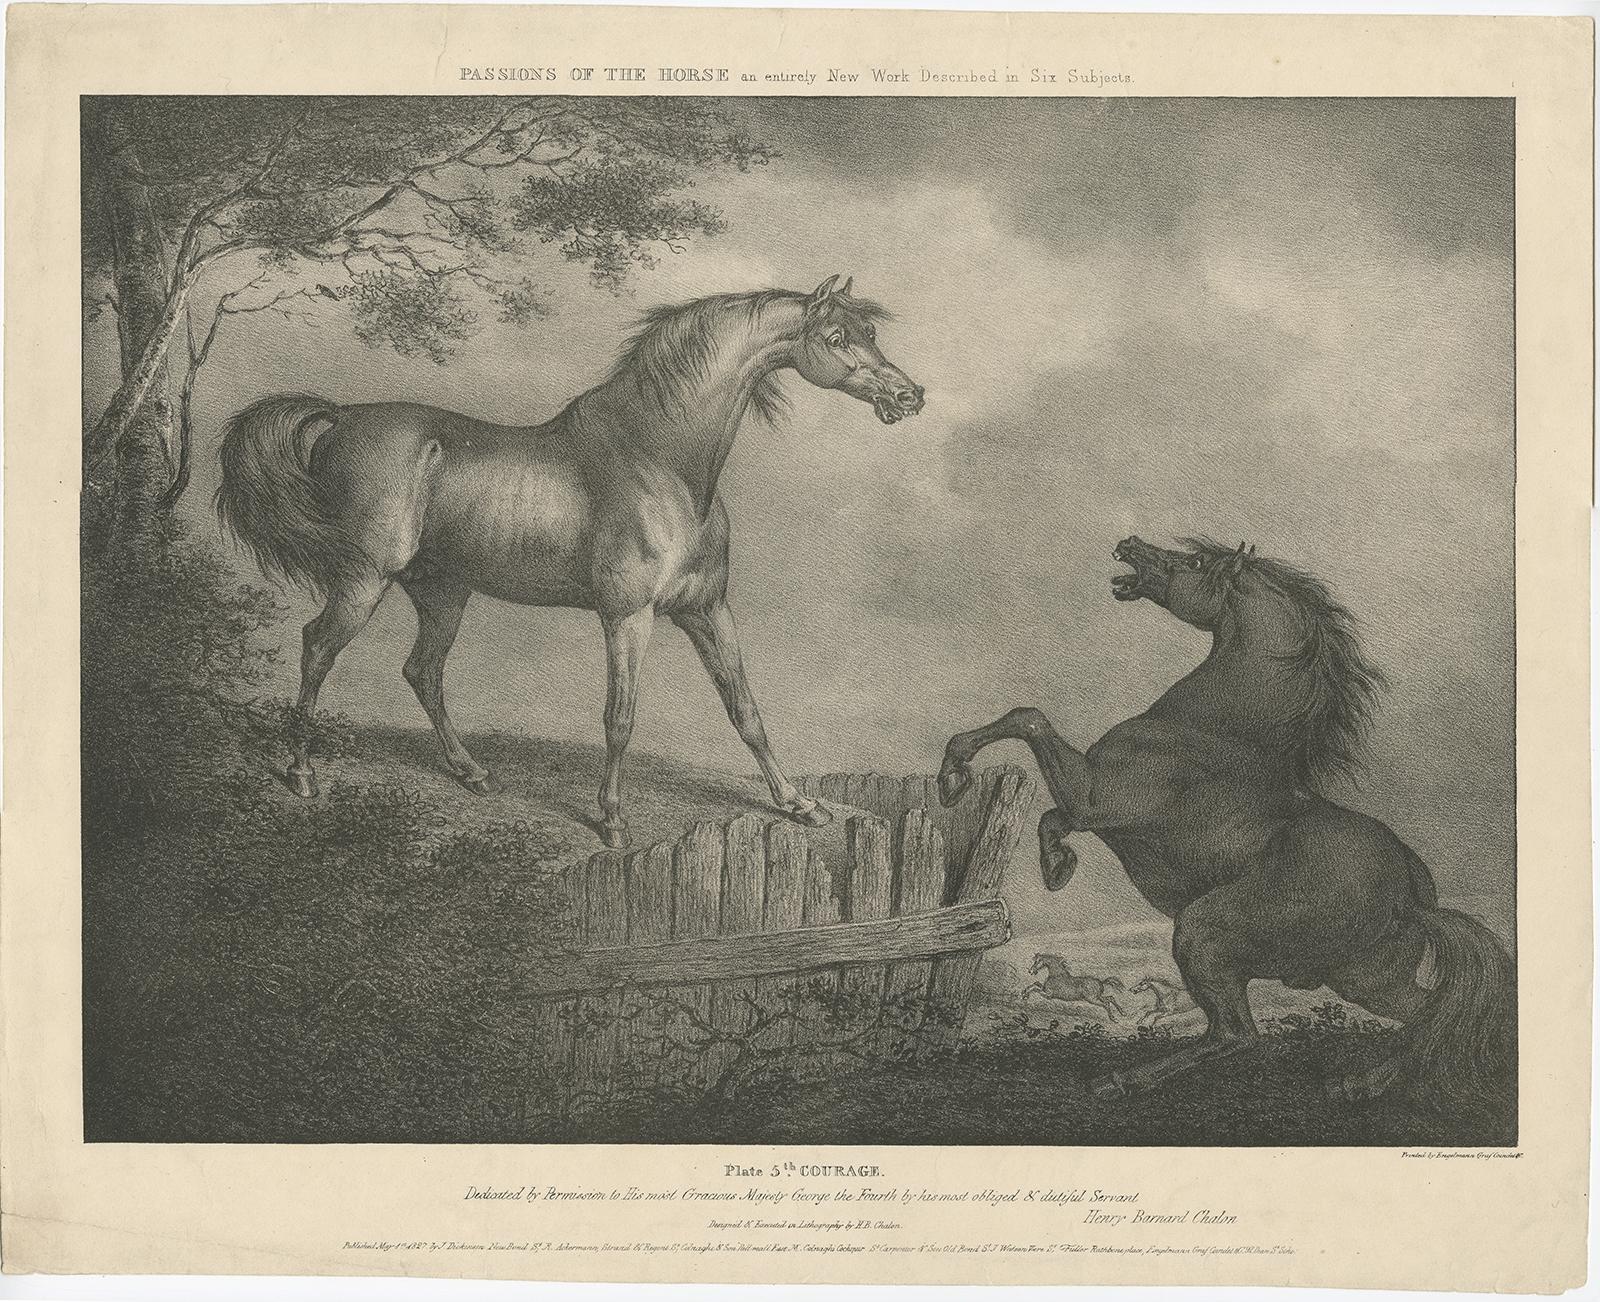 Antique horse print titled 'Plate 5th Courage, dedicated by permission to his most Gracious Majesty George the Fourth (..)'. 

Artists and Engravers: In 1827, British artist Henry Barnard Chalon (1770-1849), designed and lithographed a portfolio